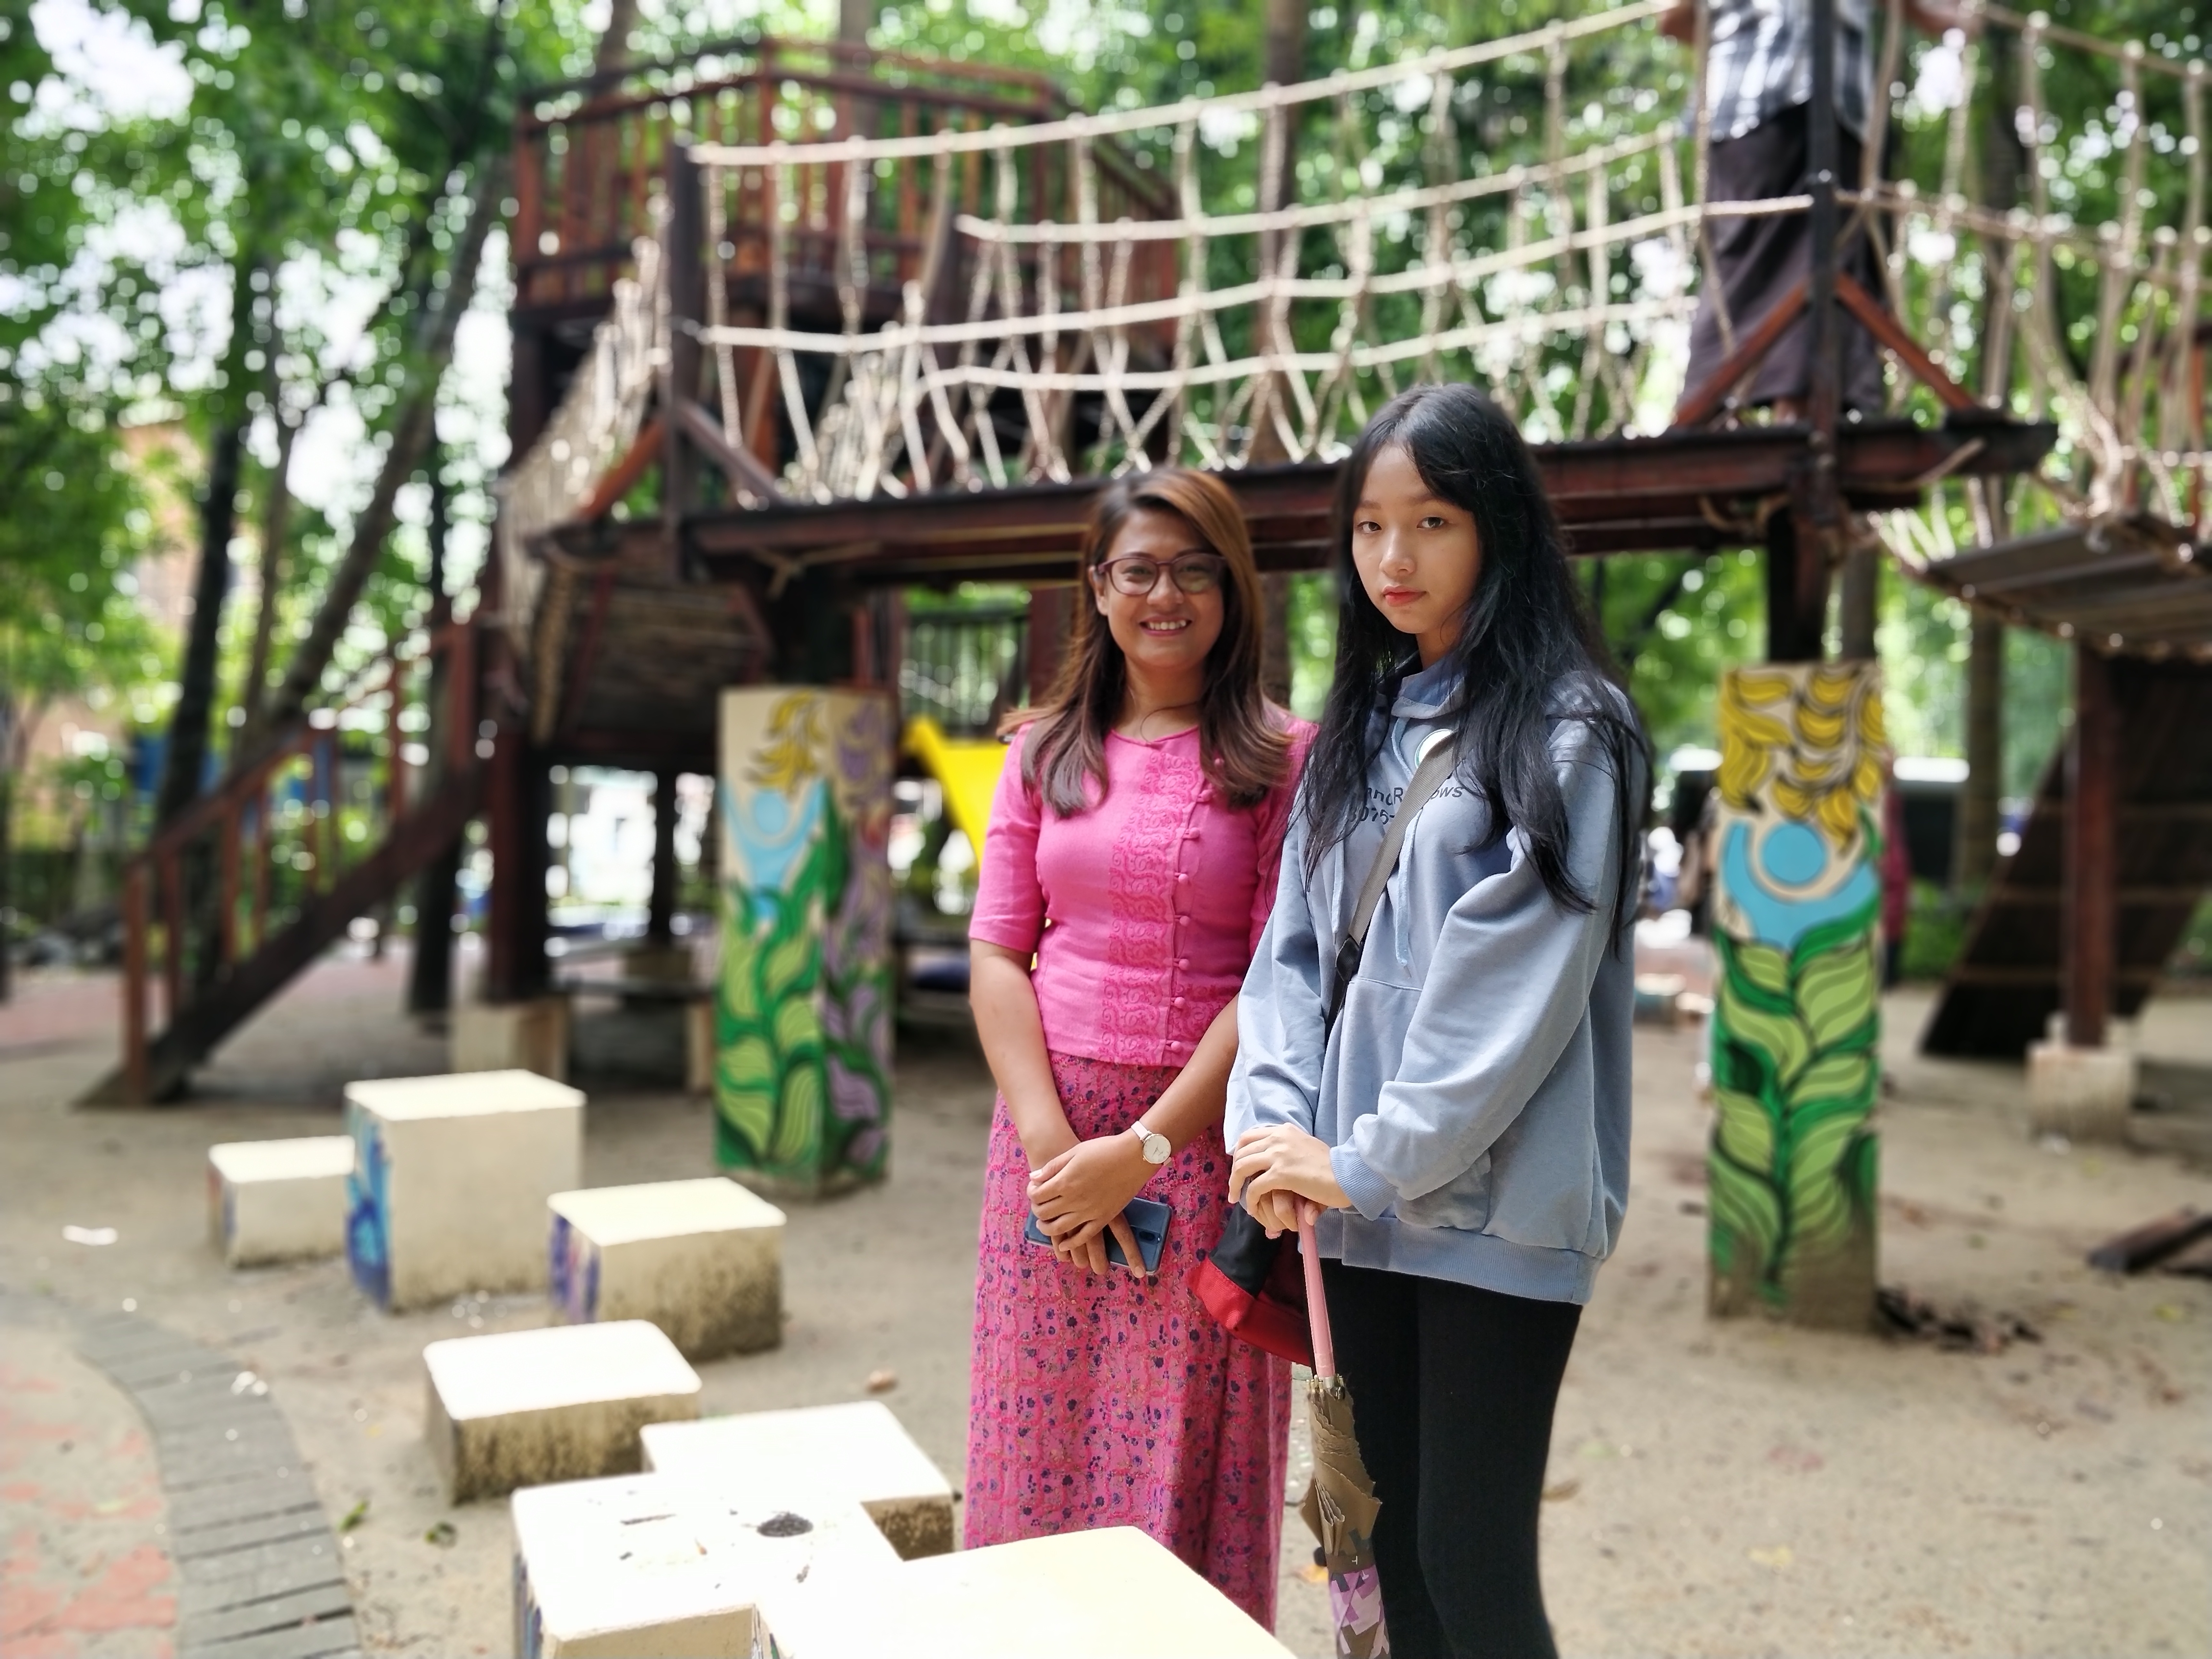 Swe Swe Aung of social enterprise Doh Eain, left, and local teenager Hsu Lin Htet, who helped design the park. (Lorcan Lovett)